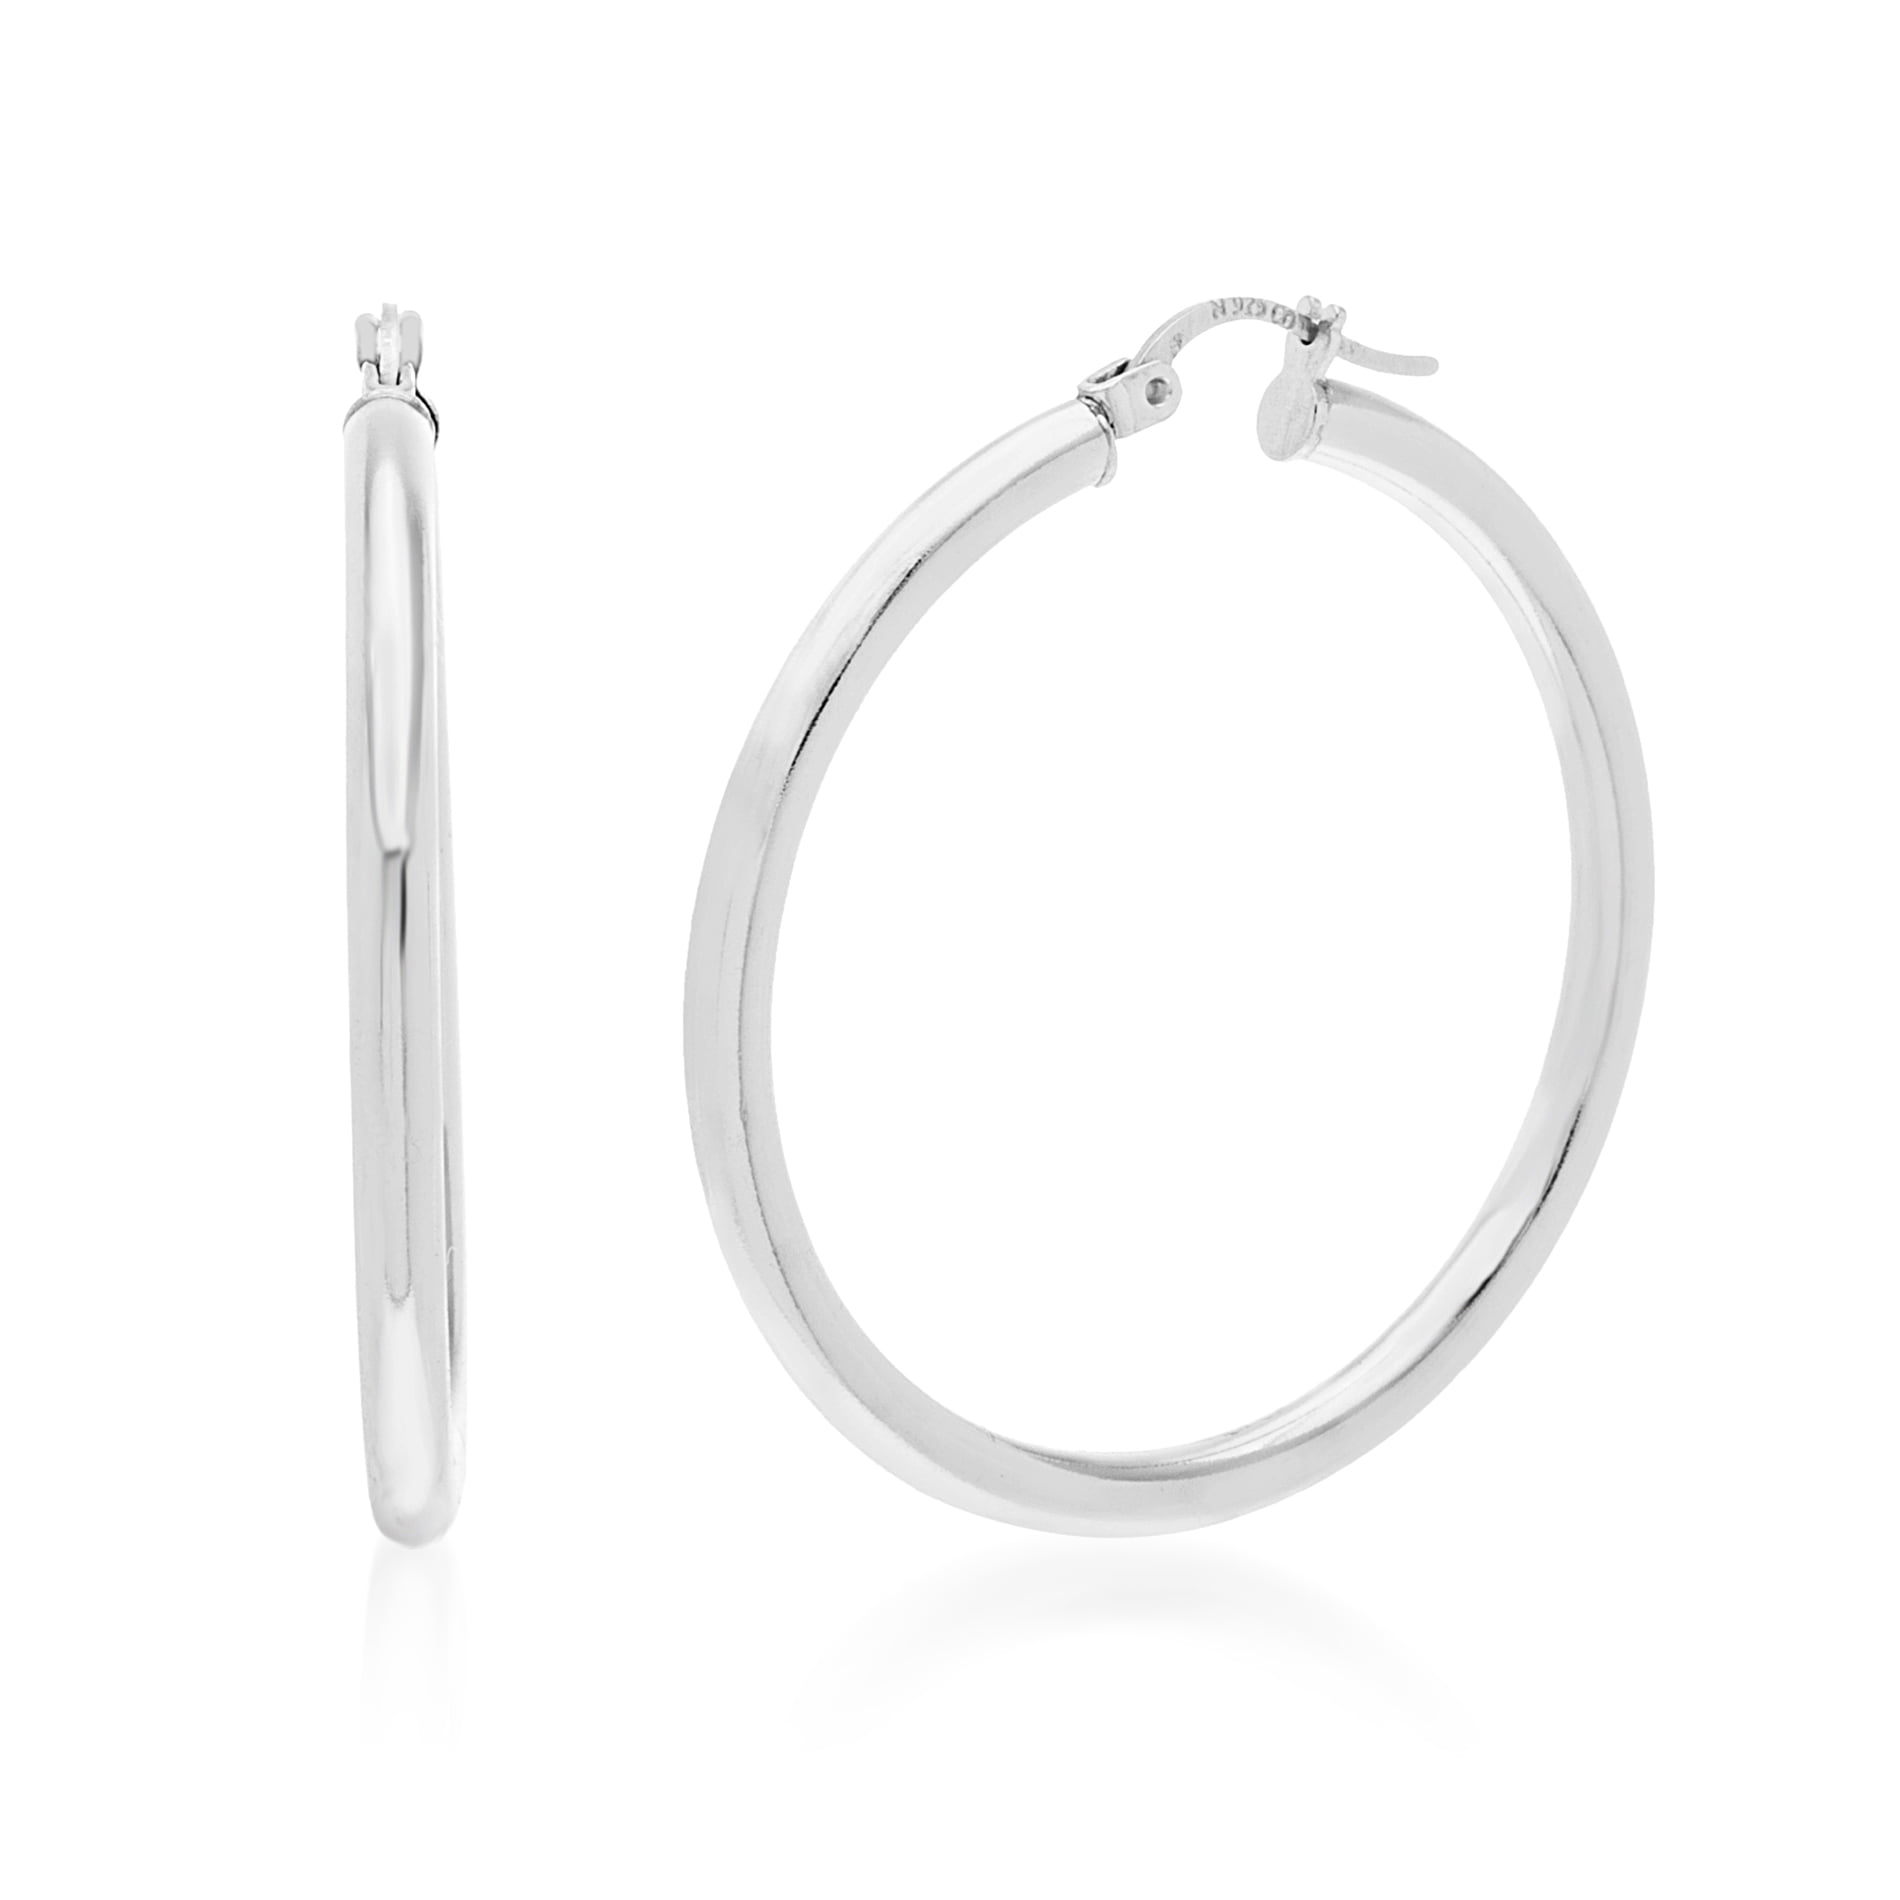 Big Apple Hoops Yellow Gold Flashed Flashed Genuine Sterling Silver 1.5mm x 15mm to 50mm Hoop Earrings 